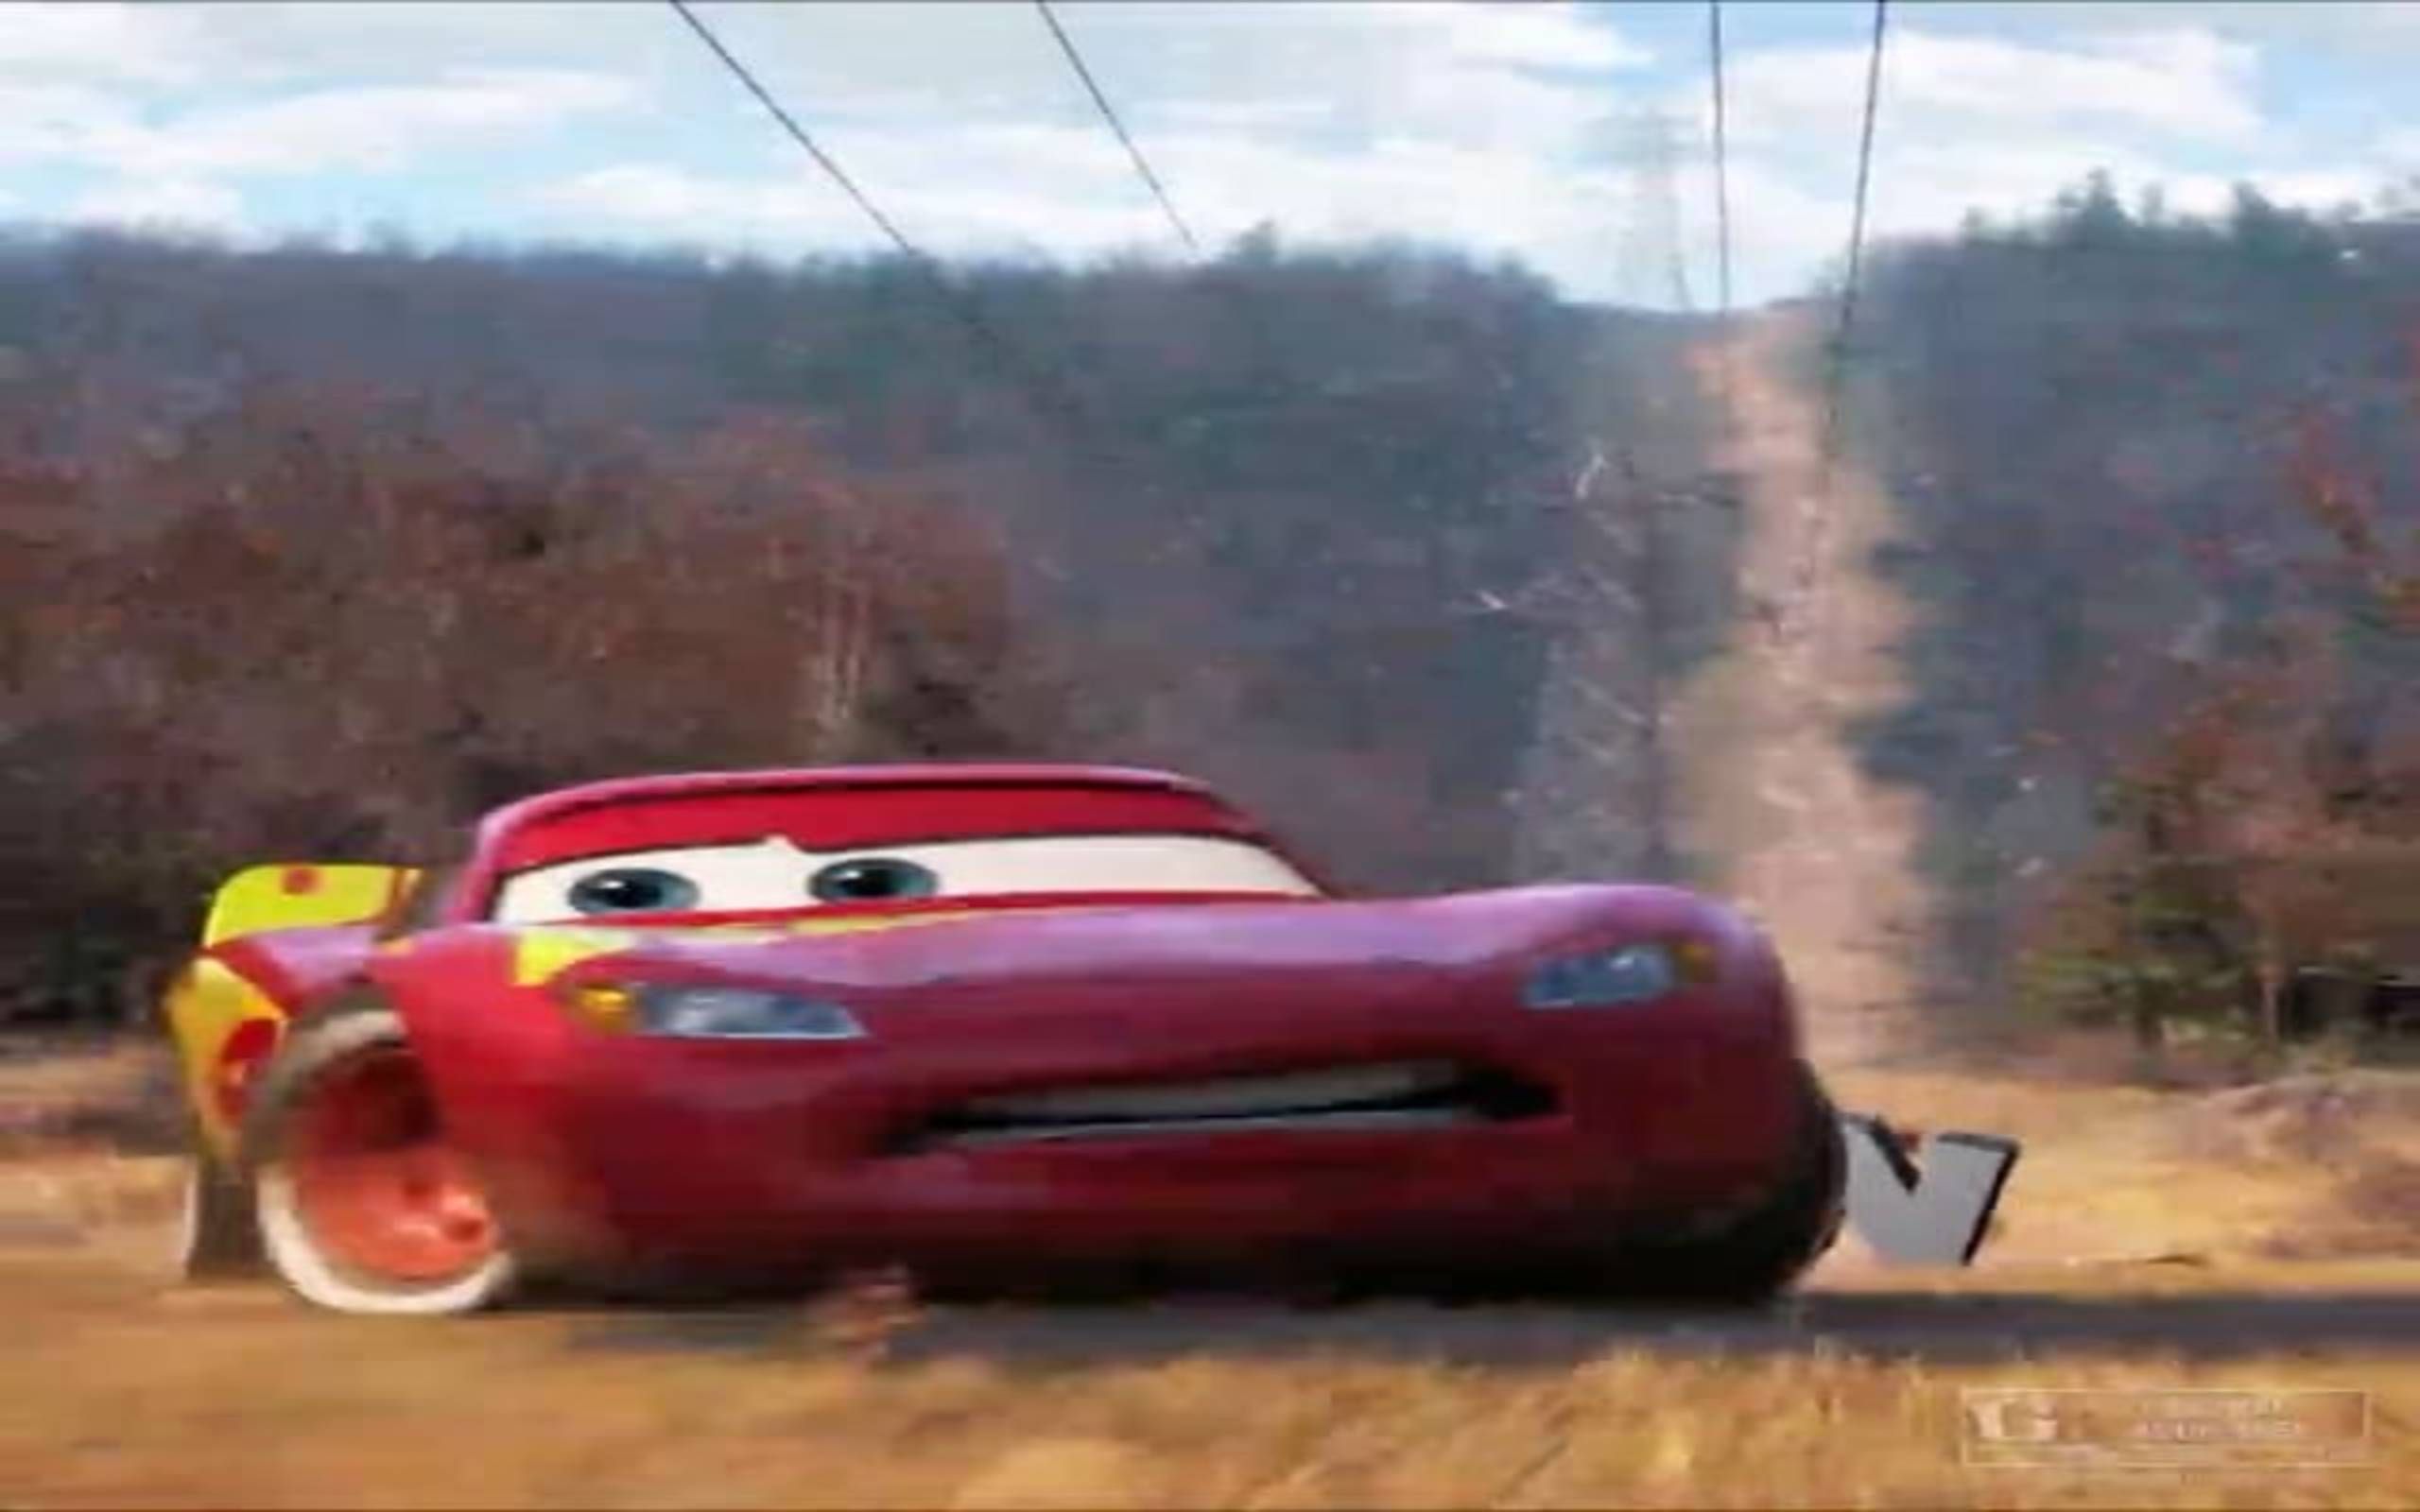 Cars 3' preview: Here's what to expect from the new Cars movie (spoiler  alert)